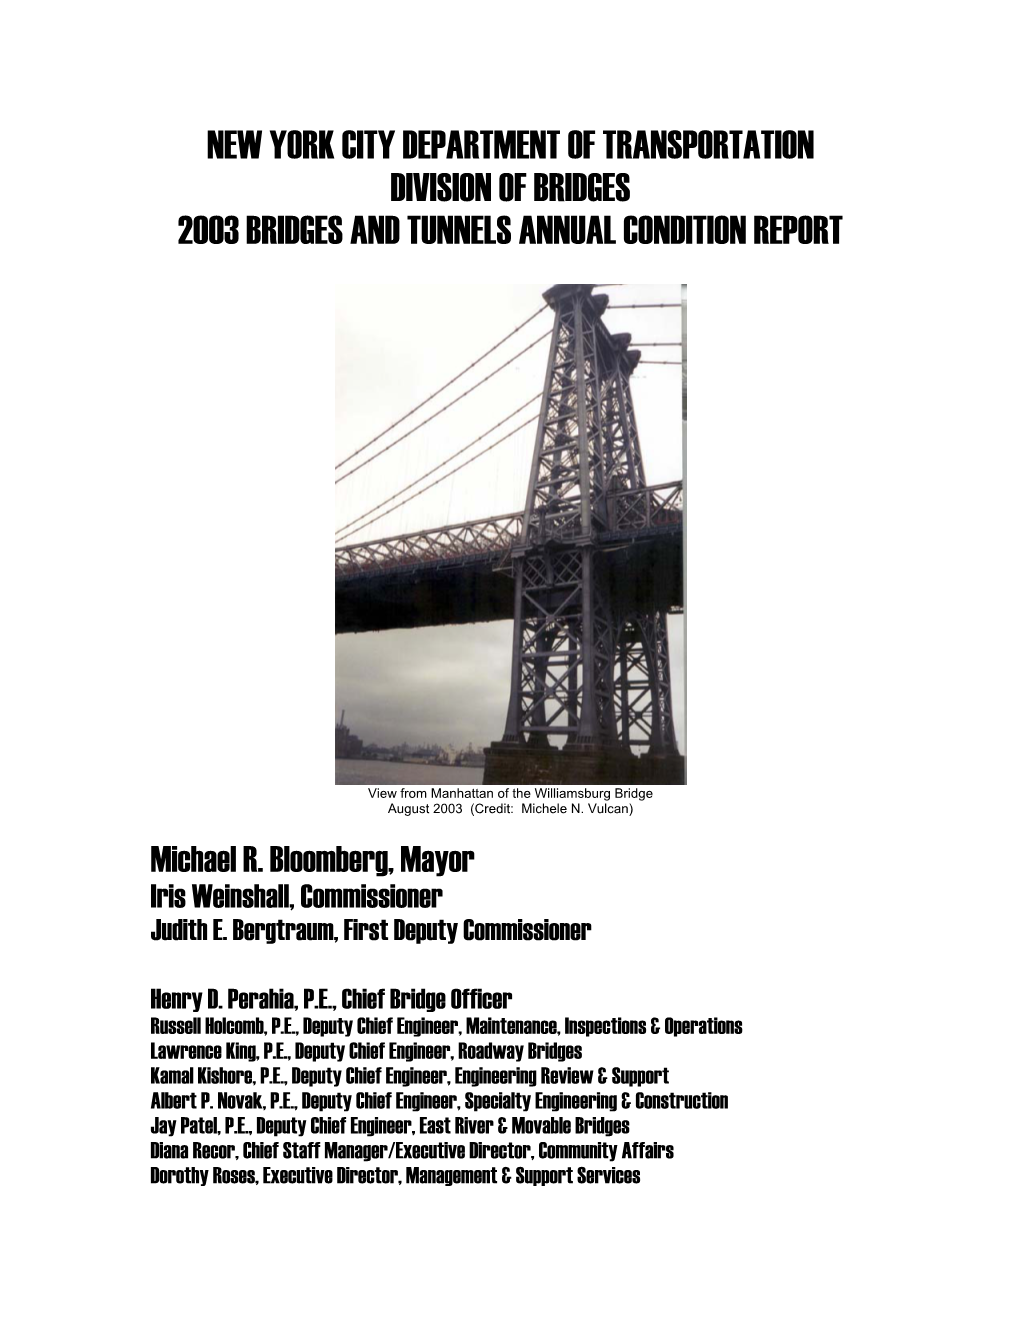 New York City Department of Transportation Division of Bridges 2003 Bridges and Tunnels Annual Condition Report